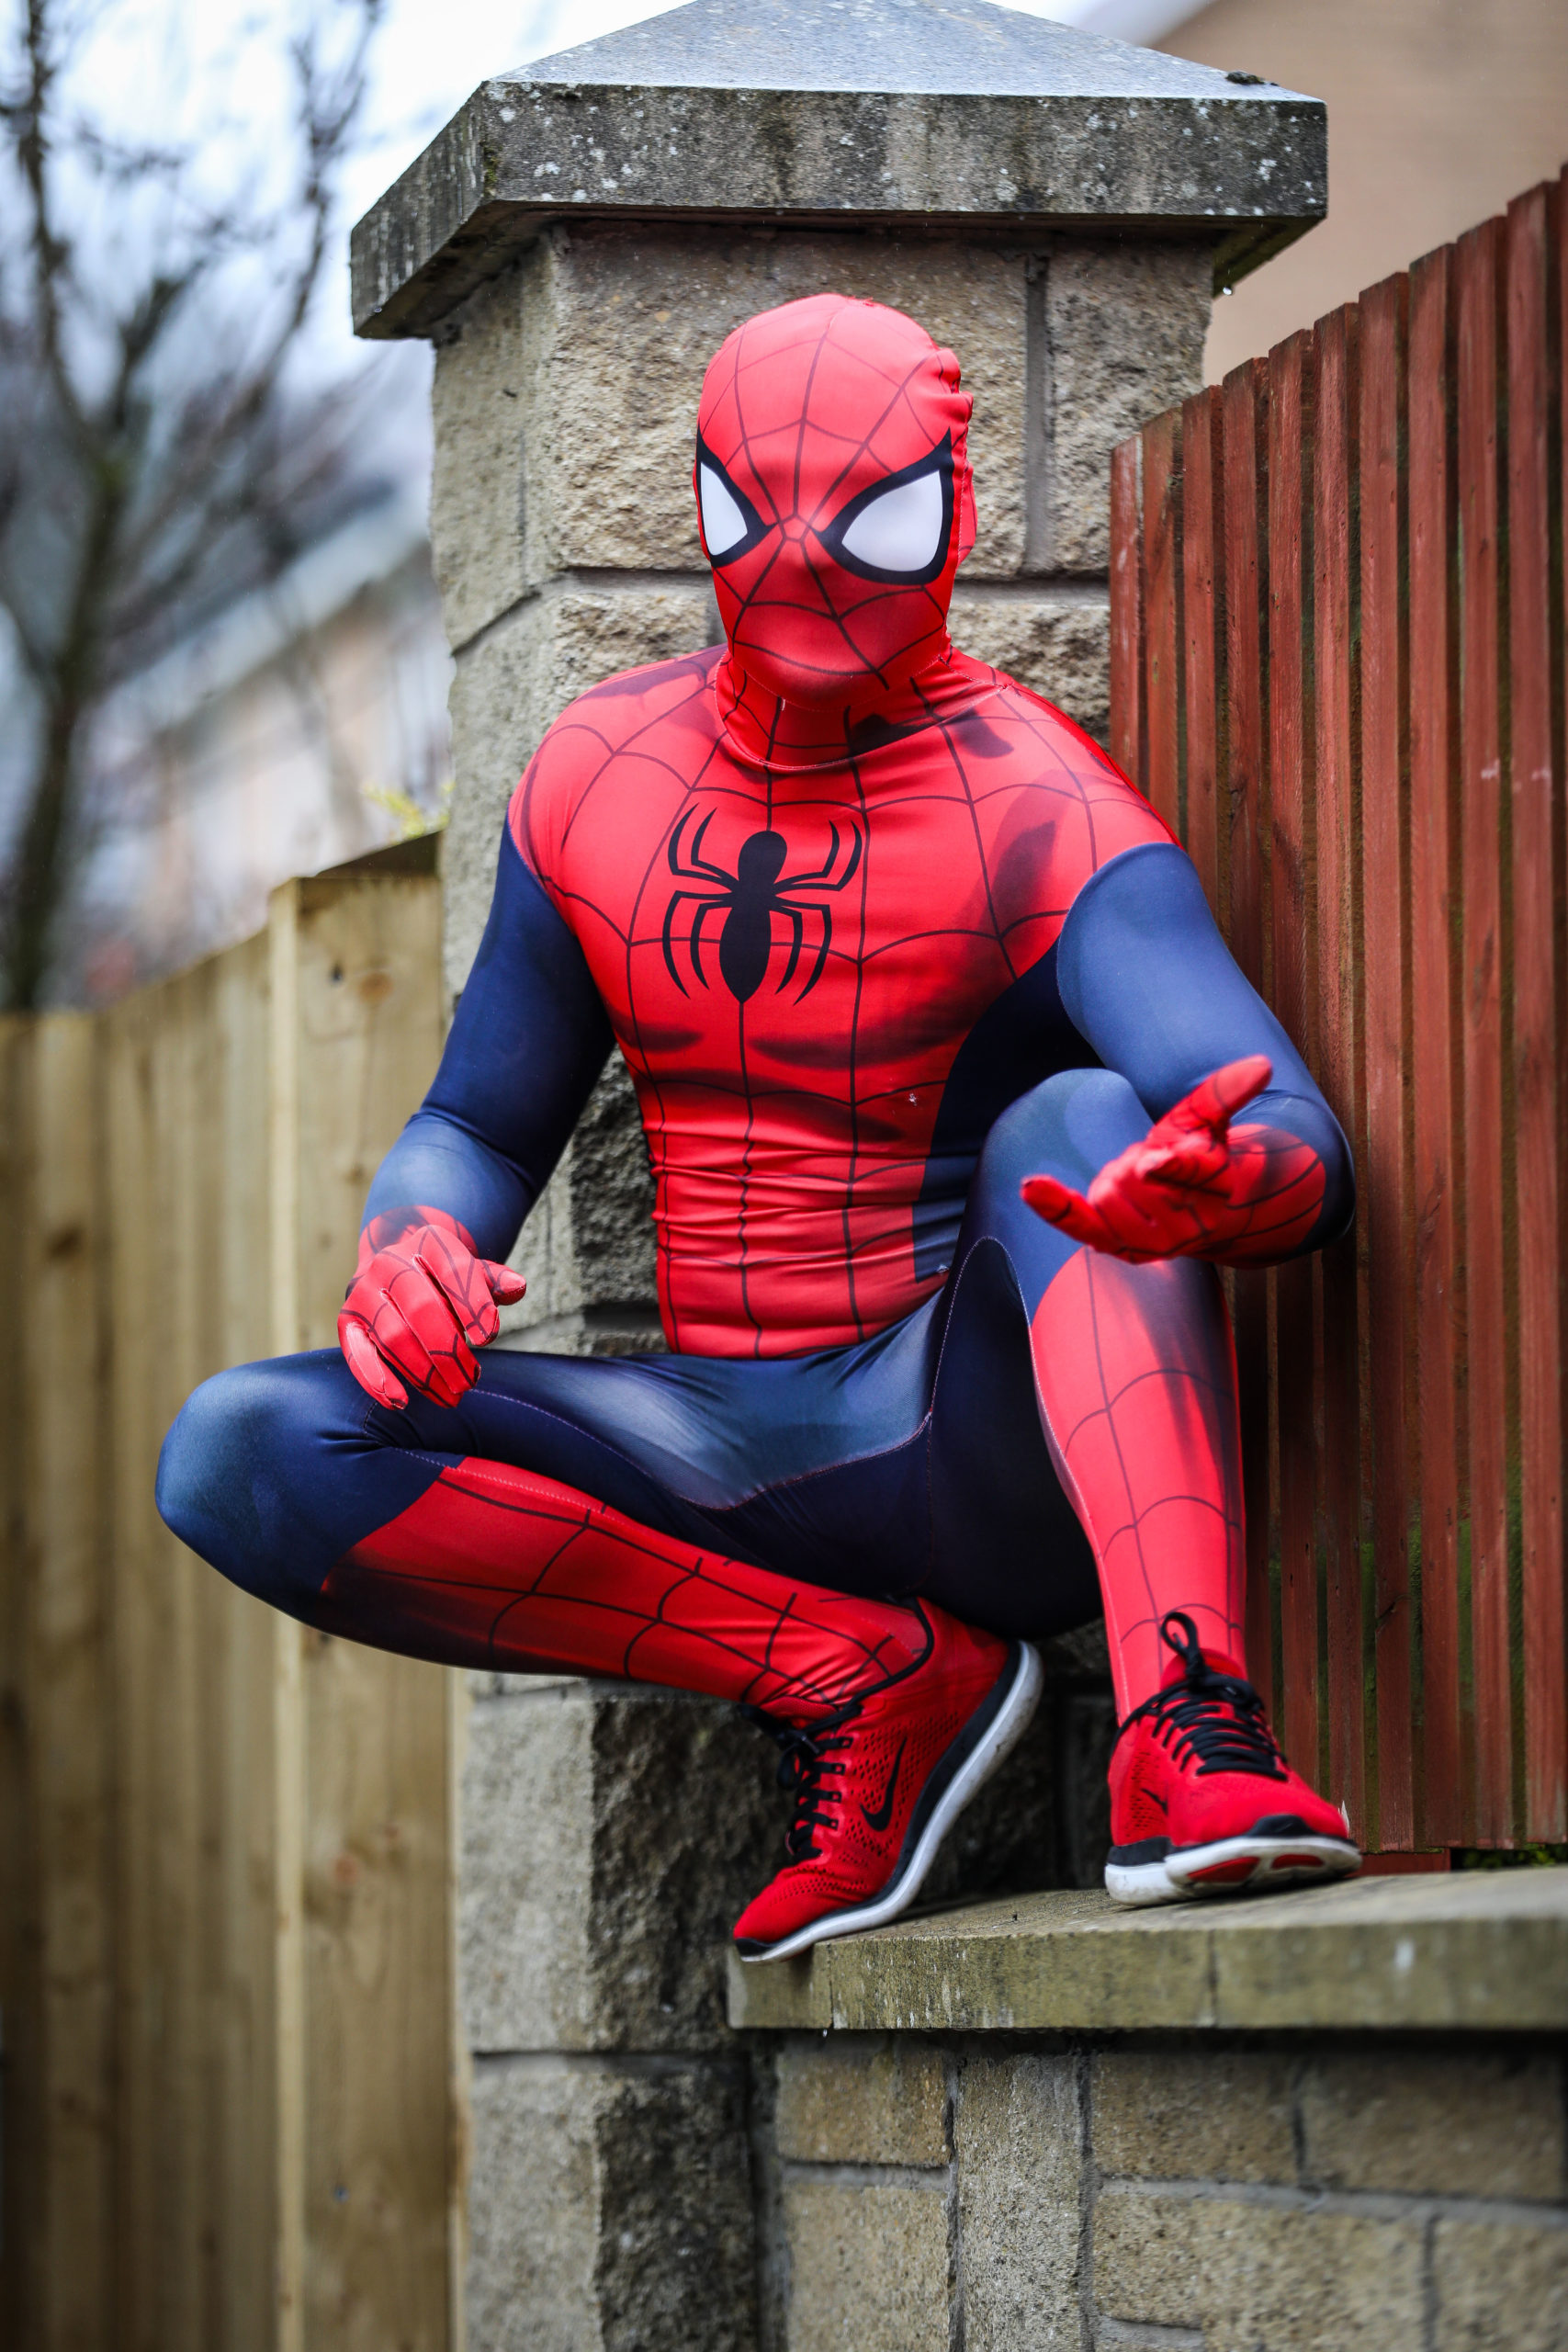 The Amazing Spider-Man spreads cheer on his daily run through Dunfermline